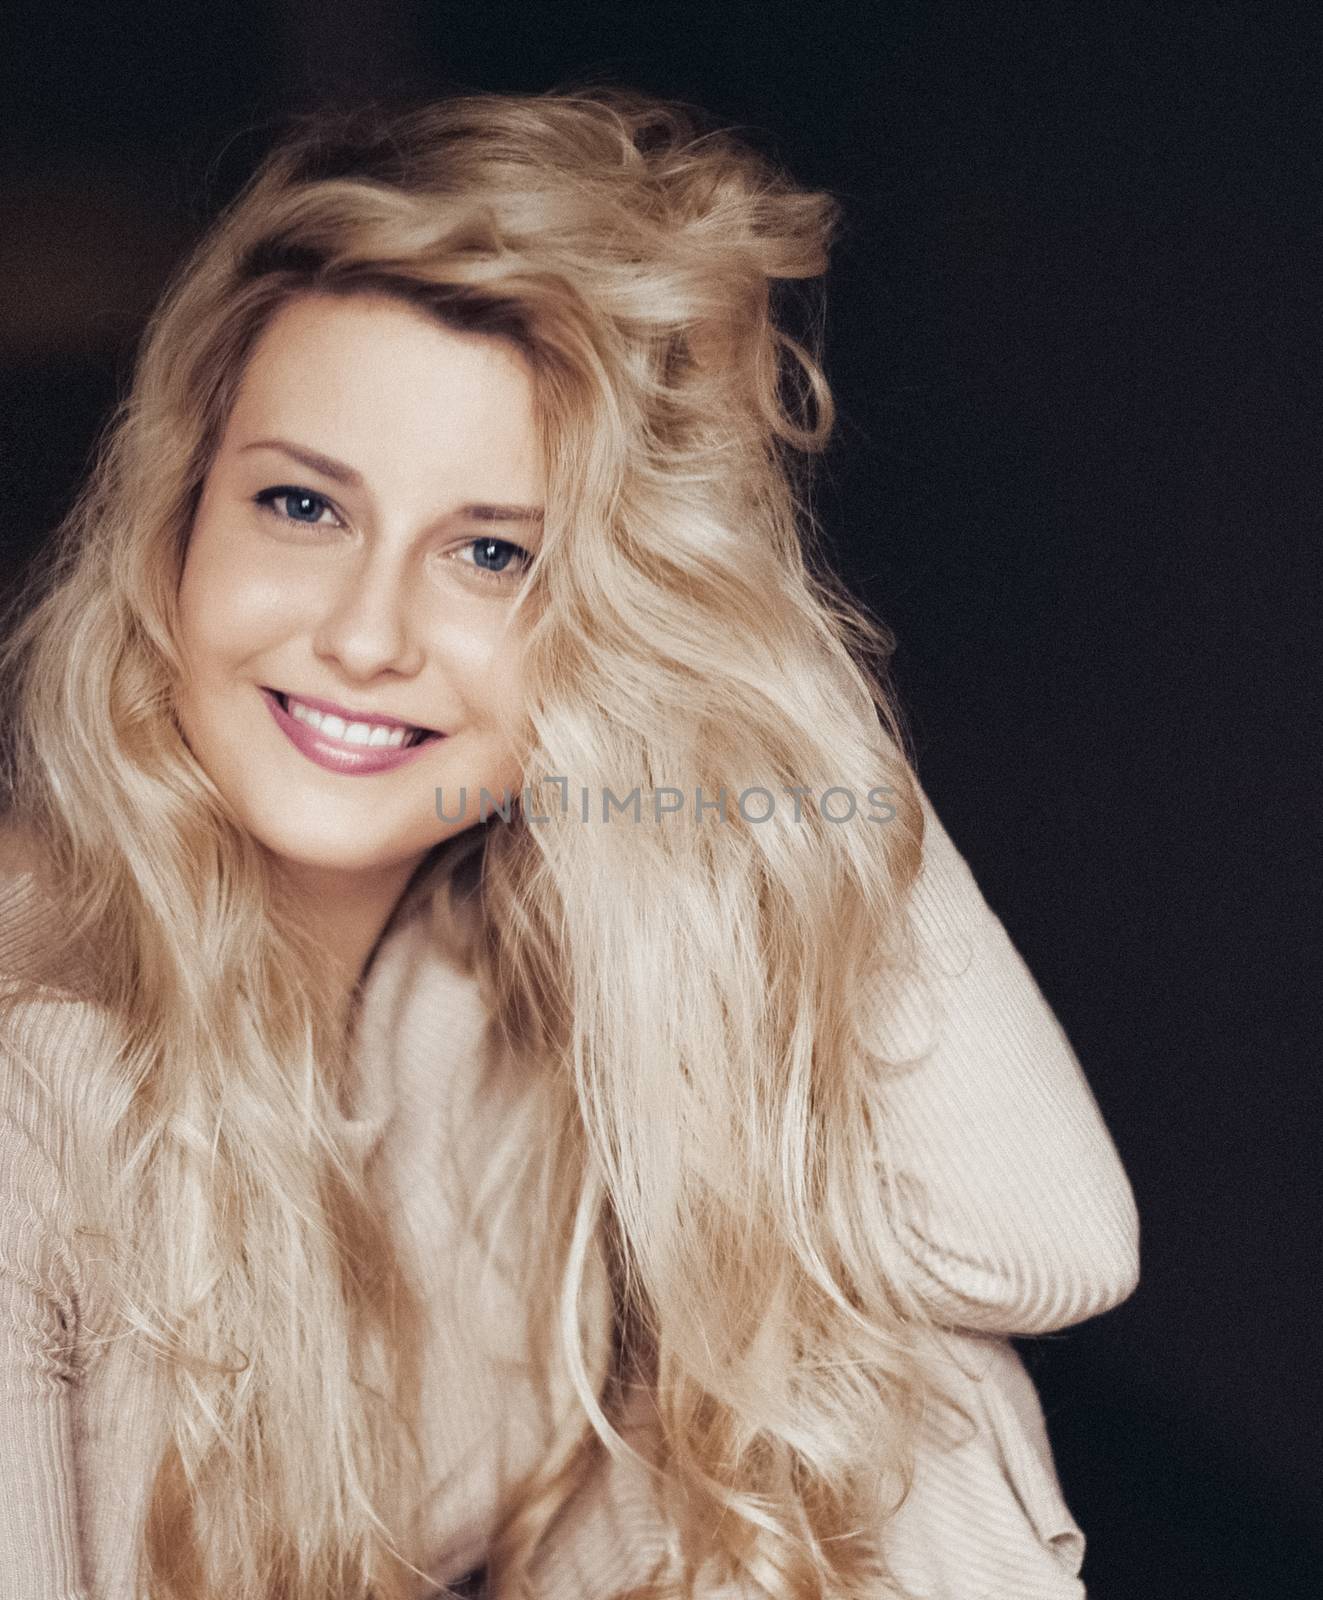 Beautiful woman smiling, long blonde hairstyle and natural makeu by Anneleven